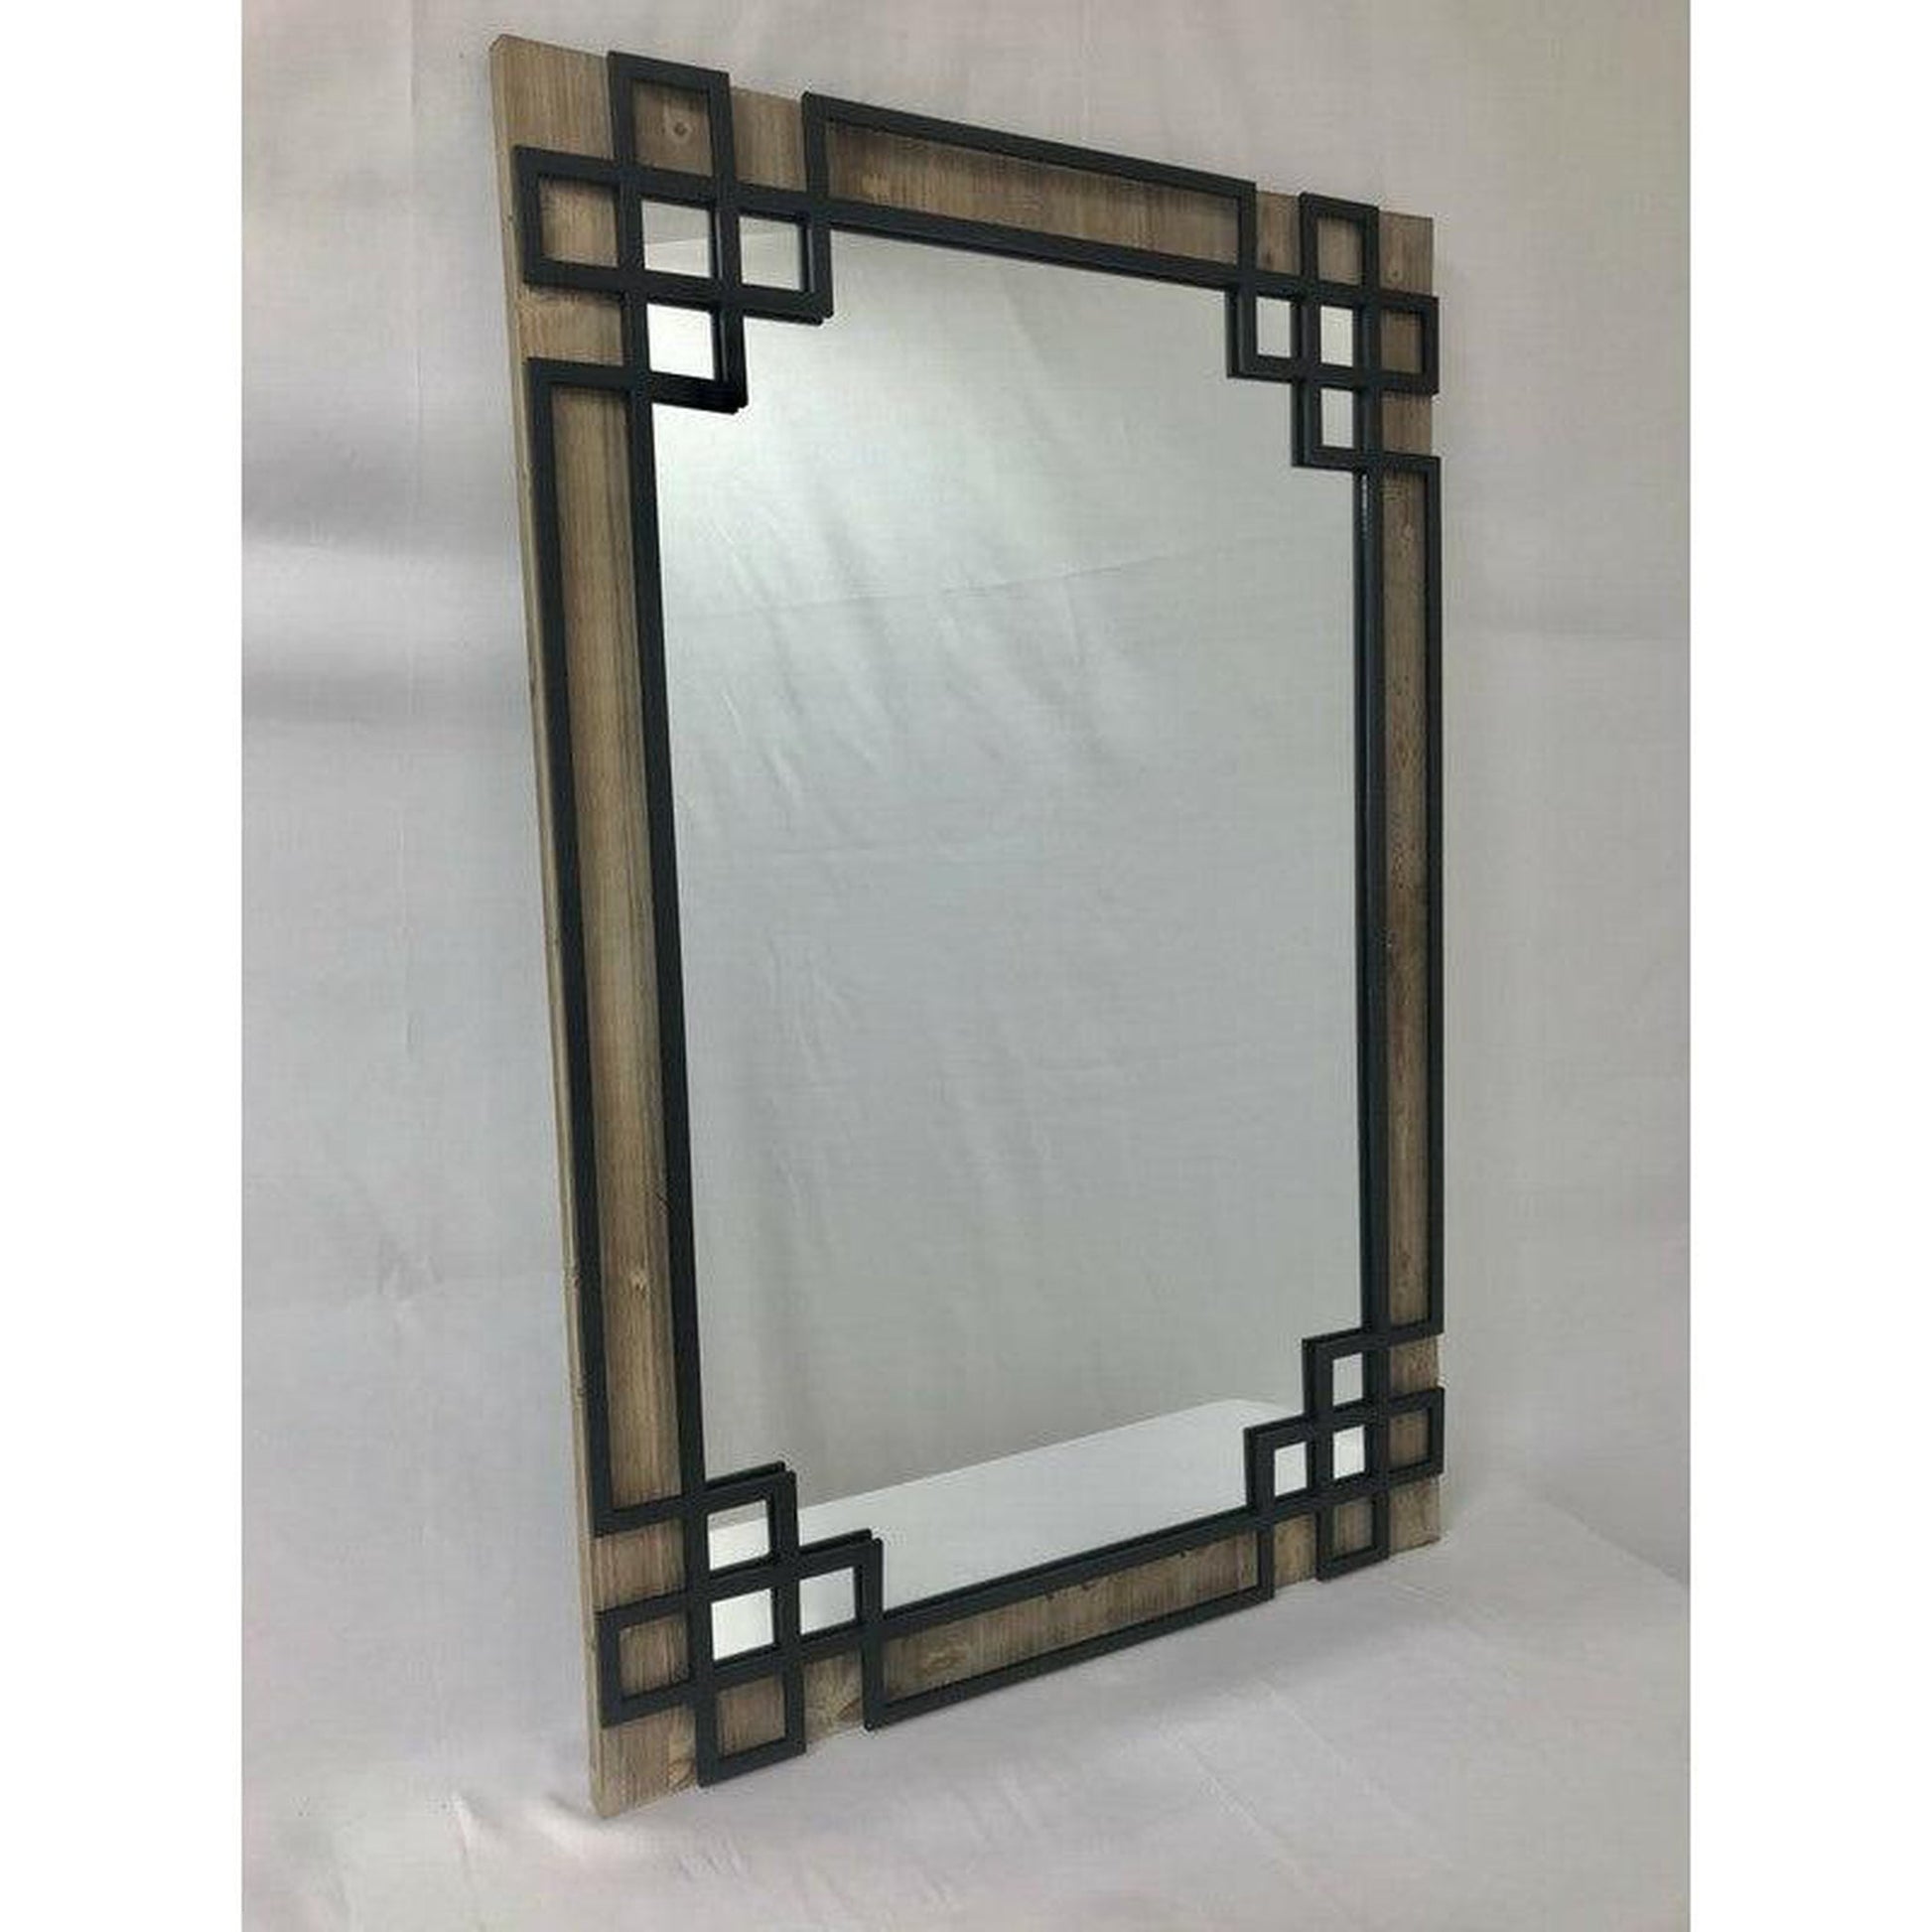 SBC Decor Elegant 28" x 42" Wall-Mounted Wood Frame Dresser Mirror In Rustic with Black Iron Overlay Finish